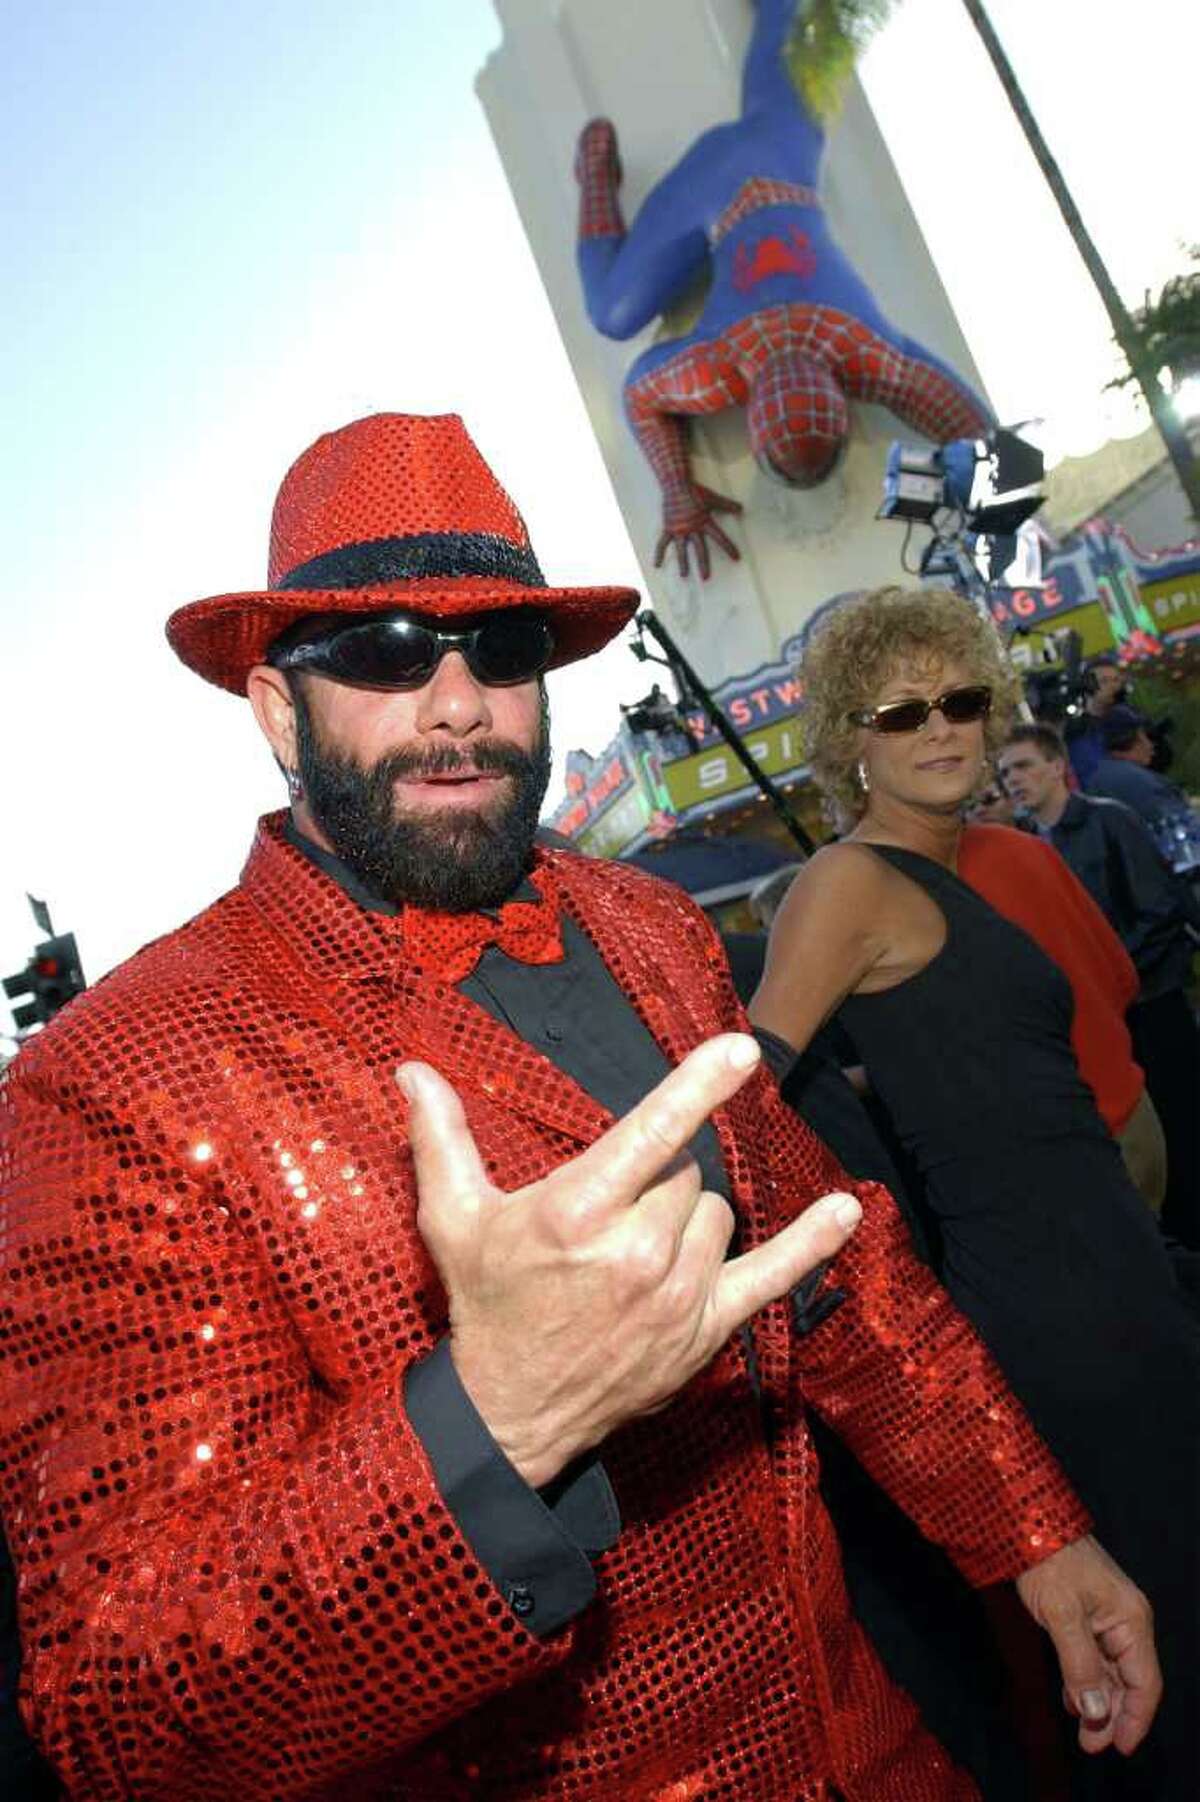 LOS ANGELES, CA - FILE: Pro wrestler Randy "Macho Man" Savage arrives at the premiere of the film "Spider-Man" April 29, 2002 in Los Angeles, California. According to reports on May 20, 2011, Savage, real name Randy Poffo, died in a car accident this morning in Tampa, Florida.